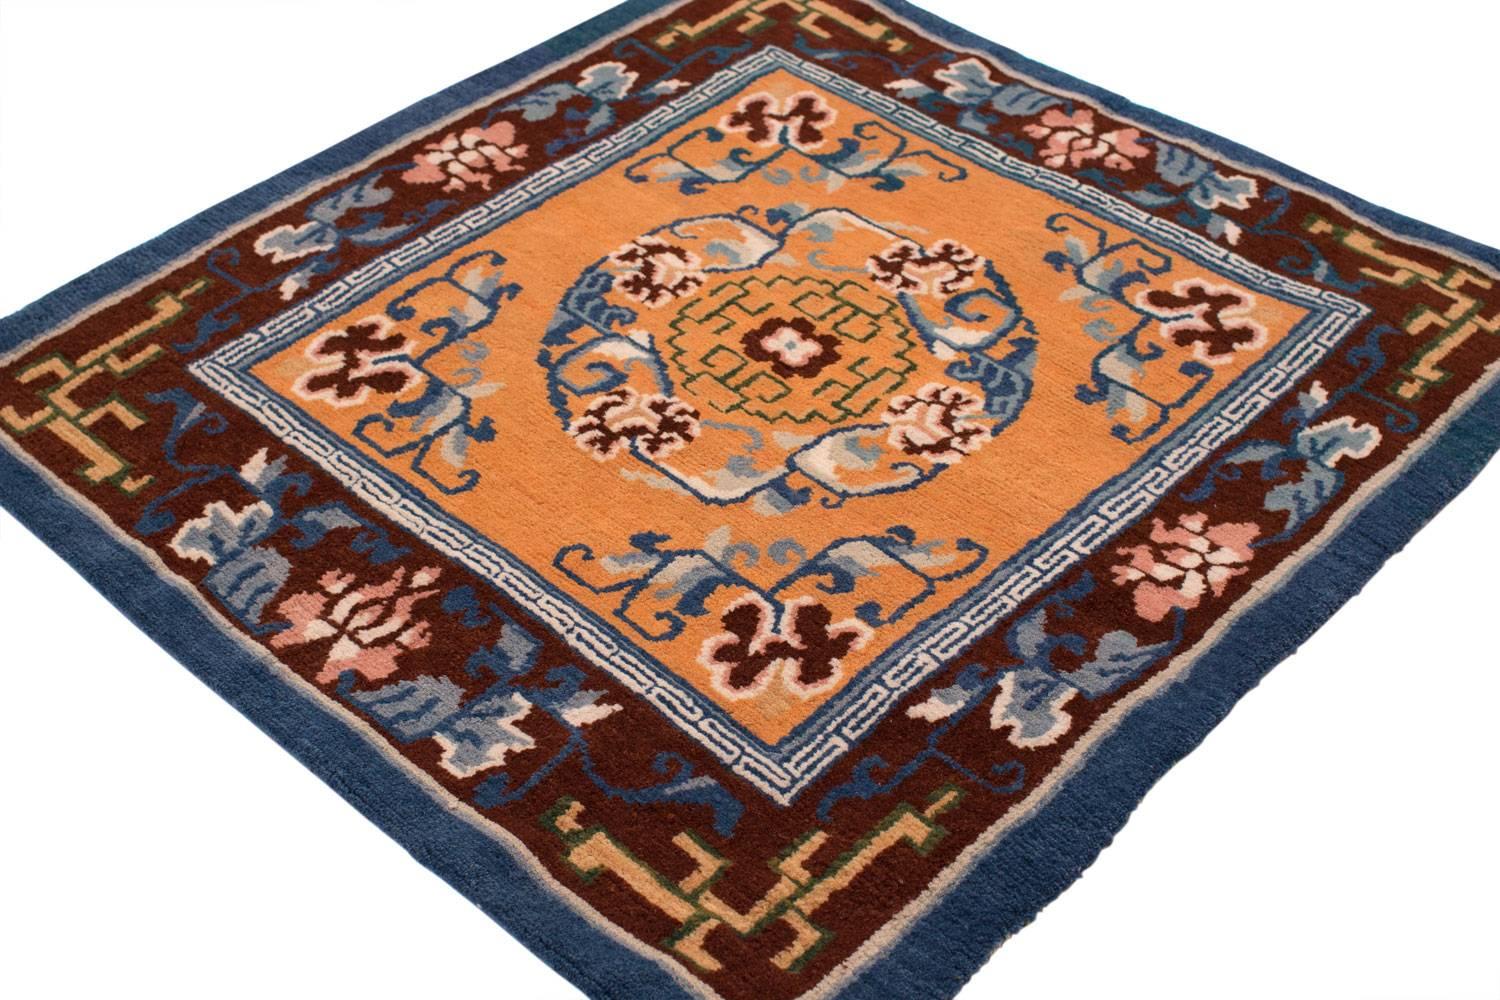 This spectacular reproduction of a small antique Tibetan mat was made with 100% Vegetable dyes made using authentic Tibetan weaving techniques. 100% Himalayan wool.